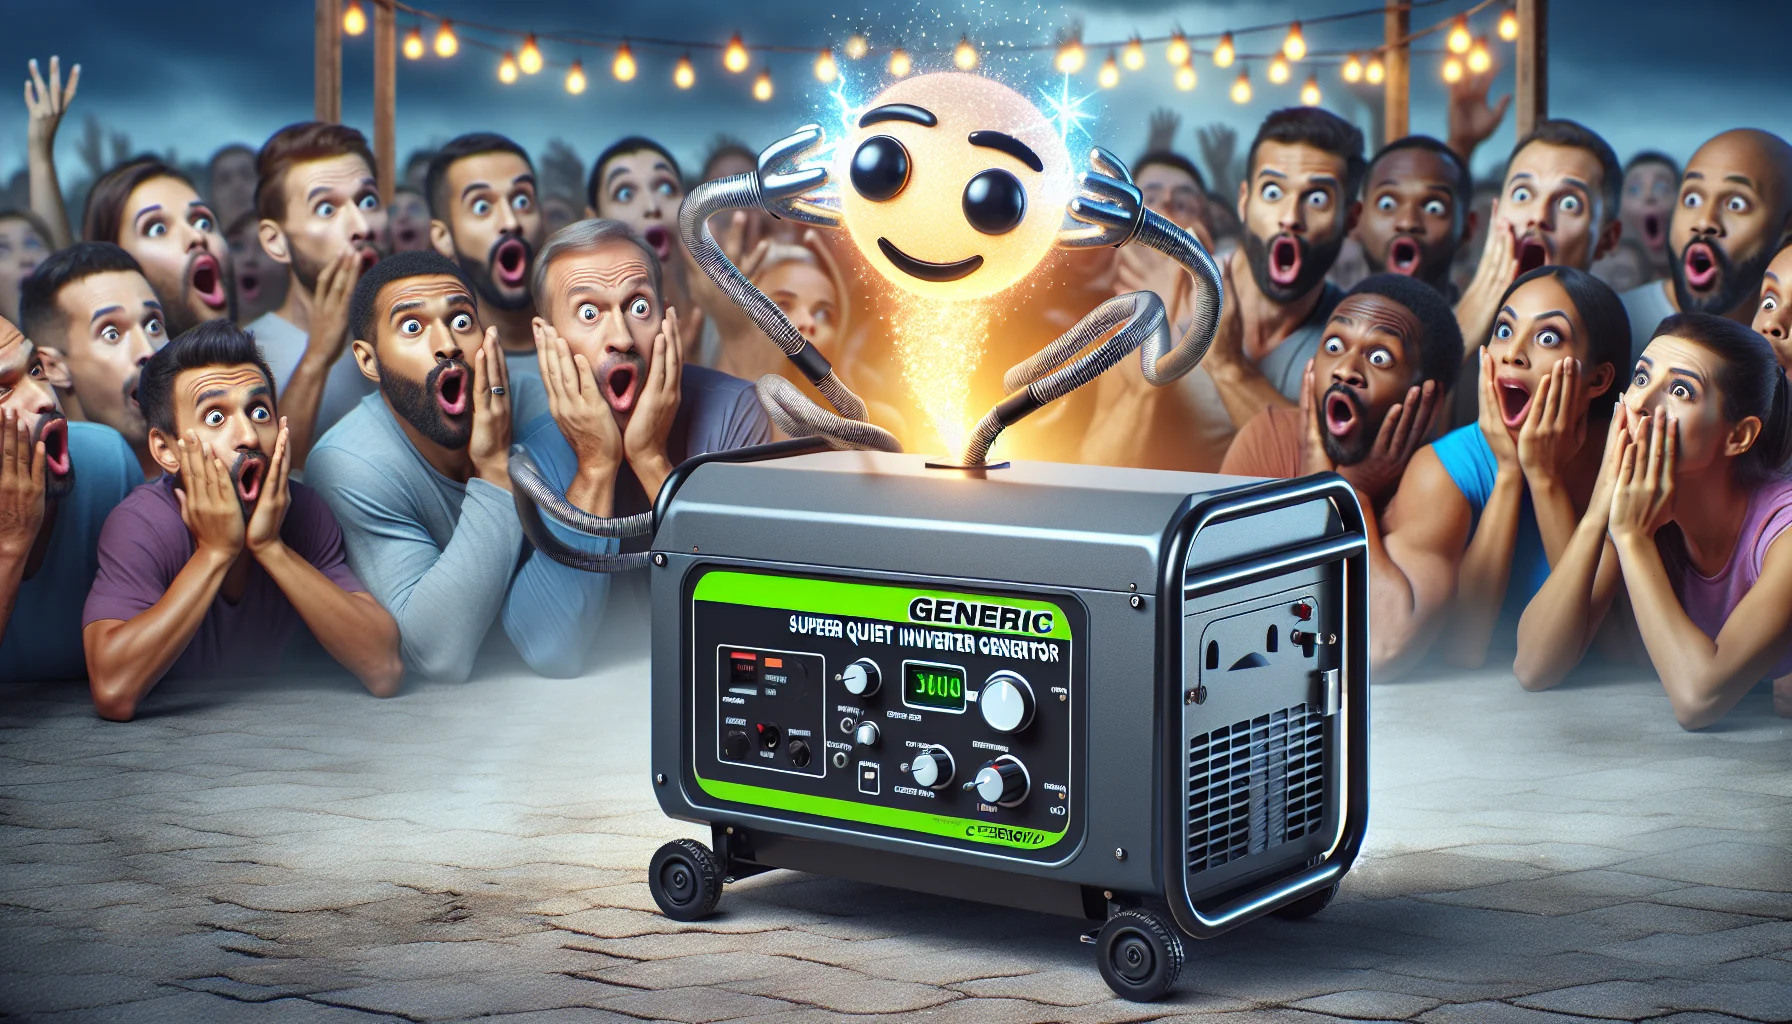 Create a lifelike image of a generic 3500-Watt Super Quiet Inverter Generator playing a comedic role in a scene. Let it be fundamentally appealing to people as it is generating electricity. Visualize the generator as having a cartoon-like facial expression, perhaps a broad grin, with its power cables serving like arms, pretending to juggle with bright, sparkling spheres of electricity. Surprised people of various descents including Caucasian, Black and Hispanic, both men and women, captivated by the spectacle, can be pictured in the background.